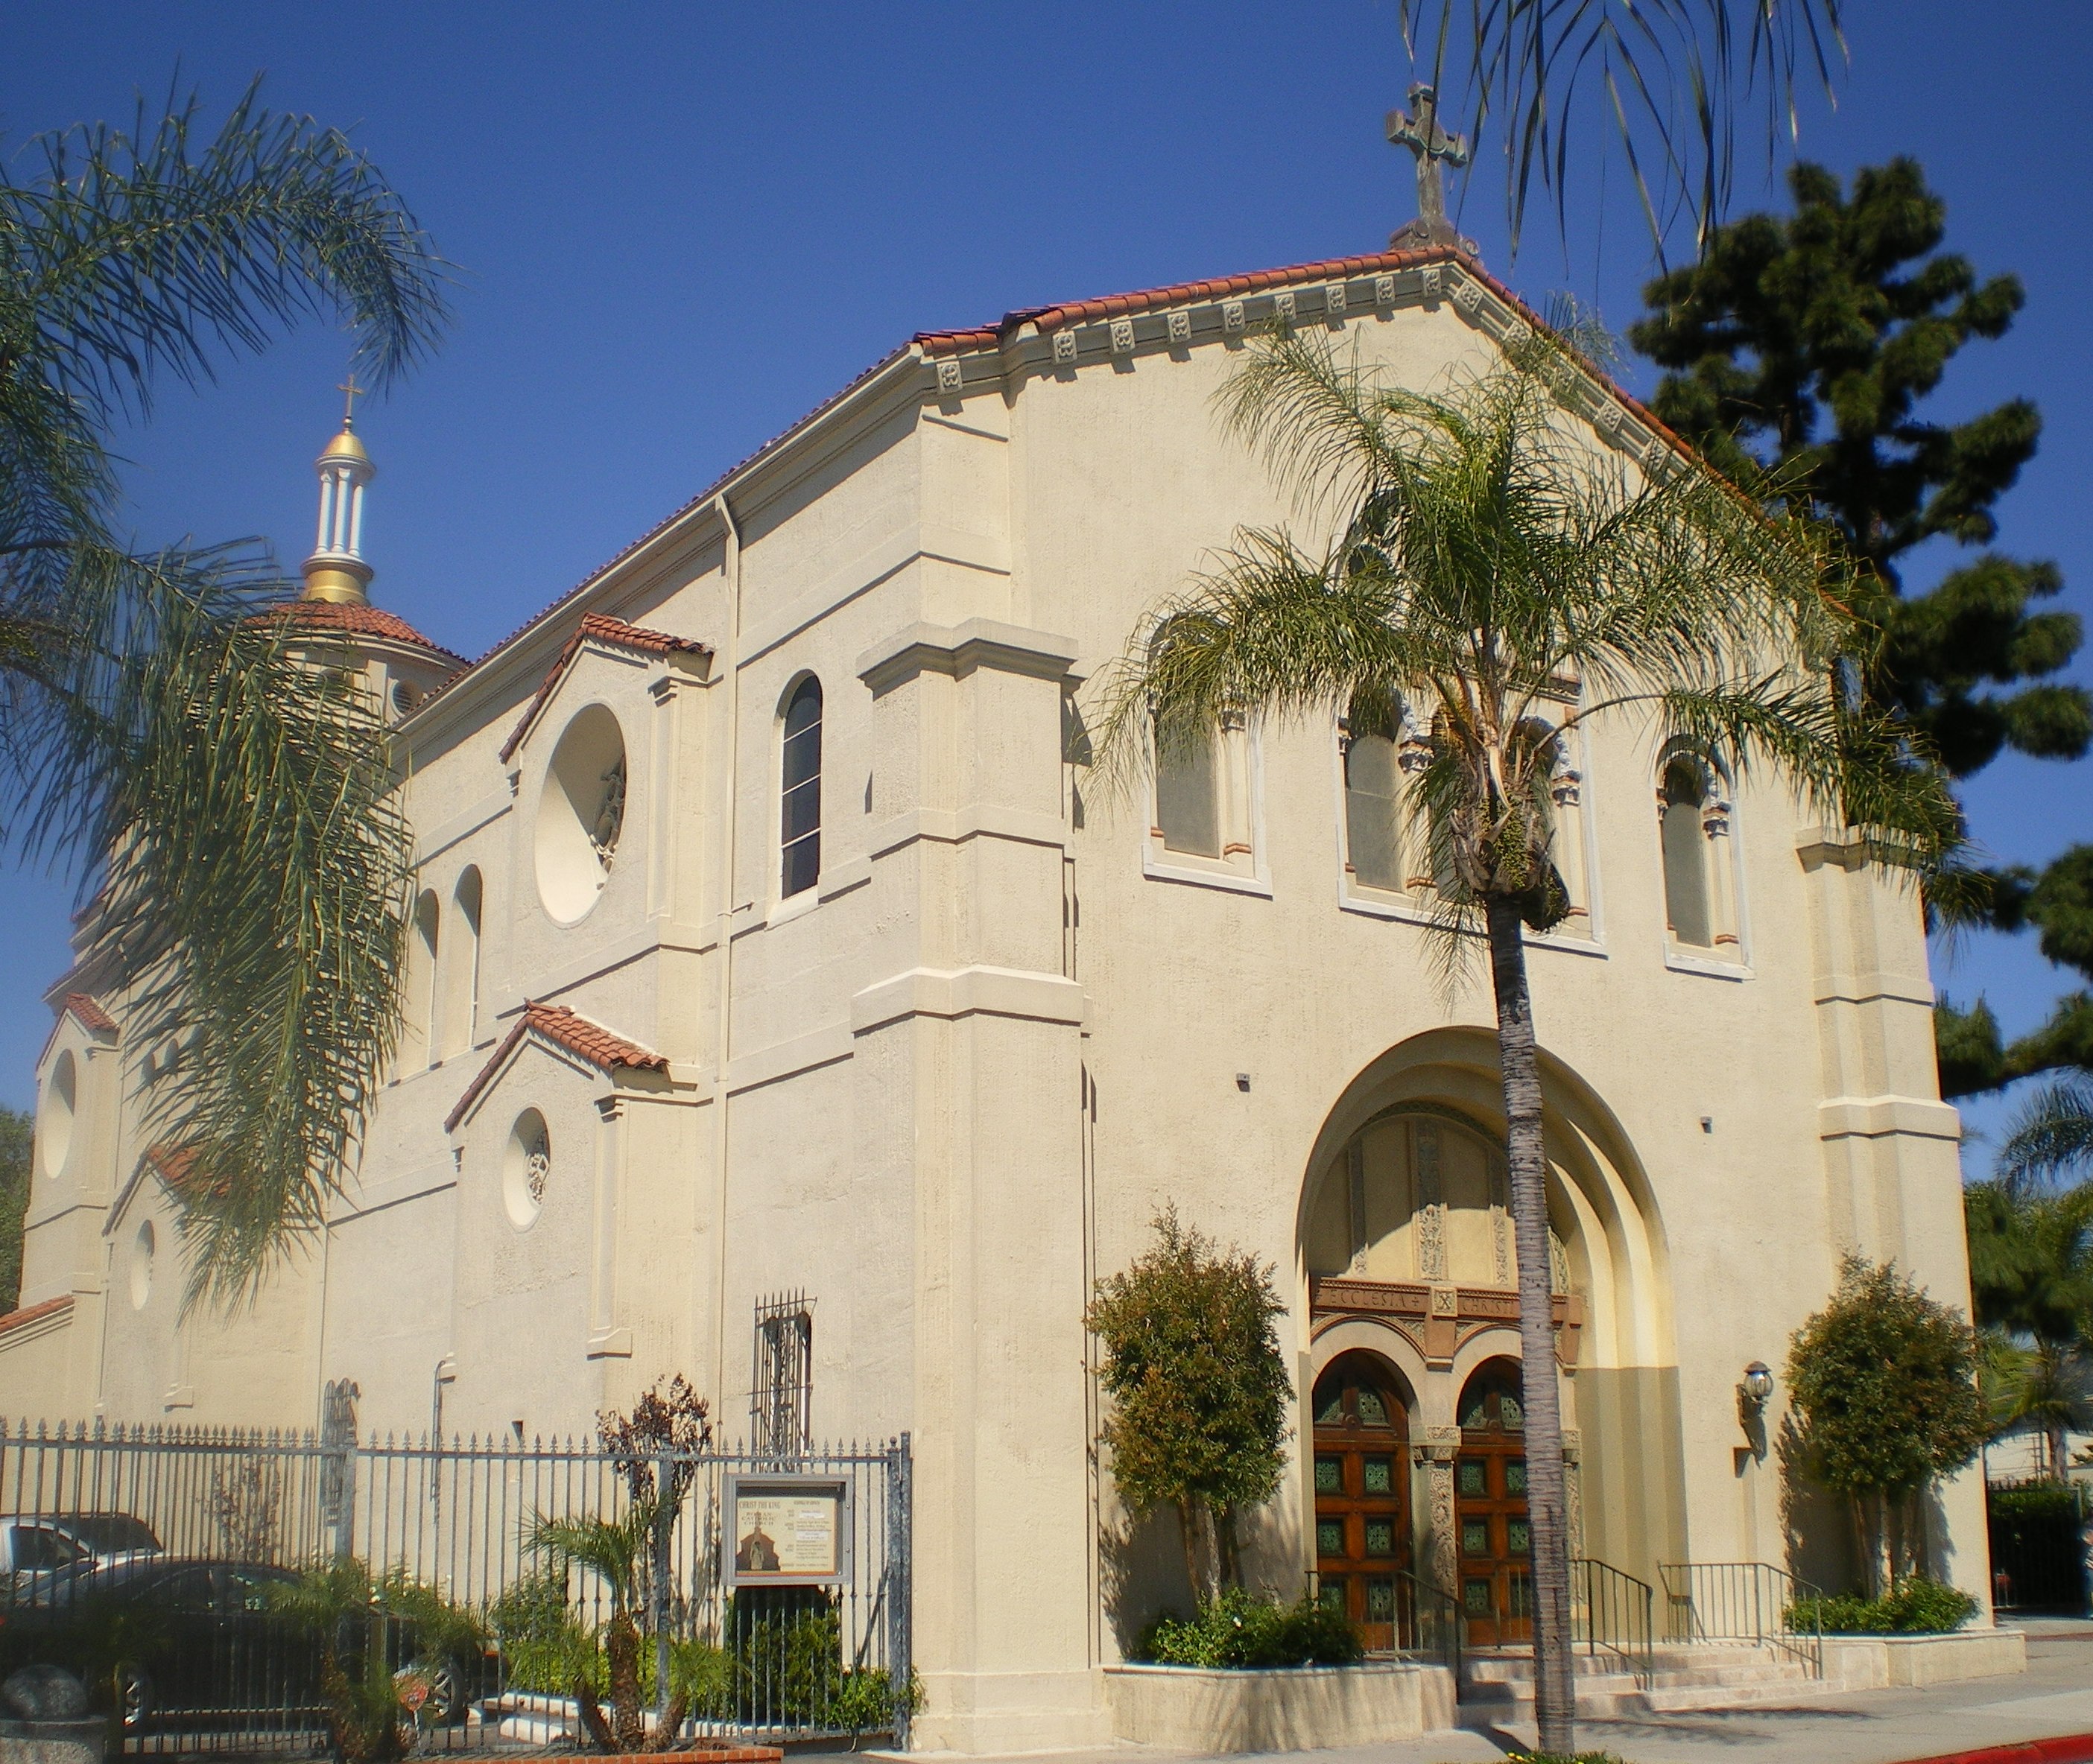 Los Angeles Dating In Catholic